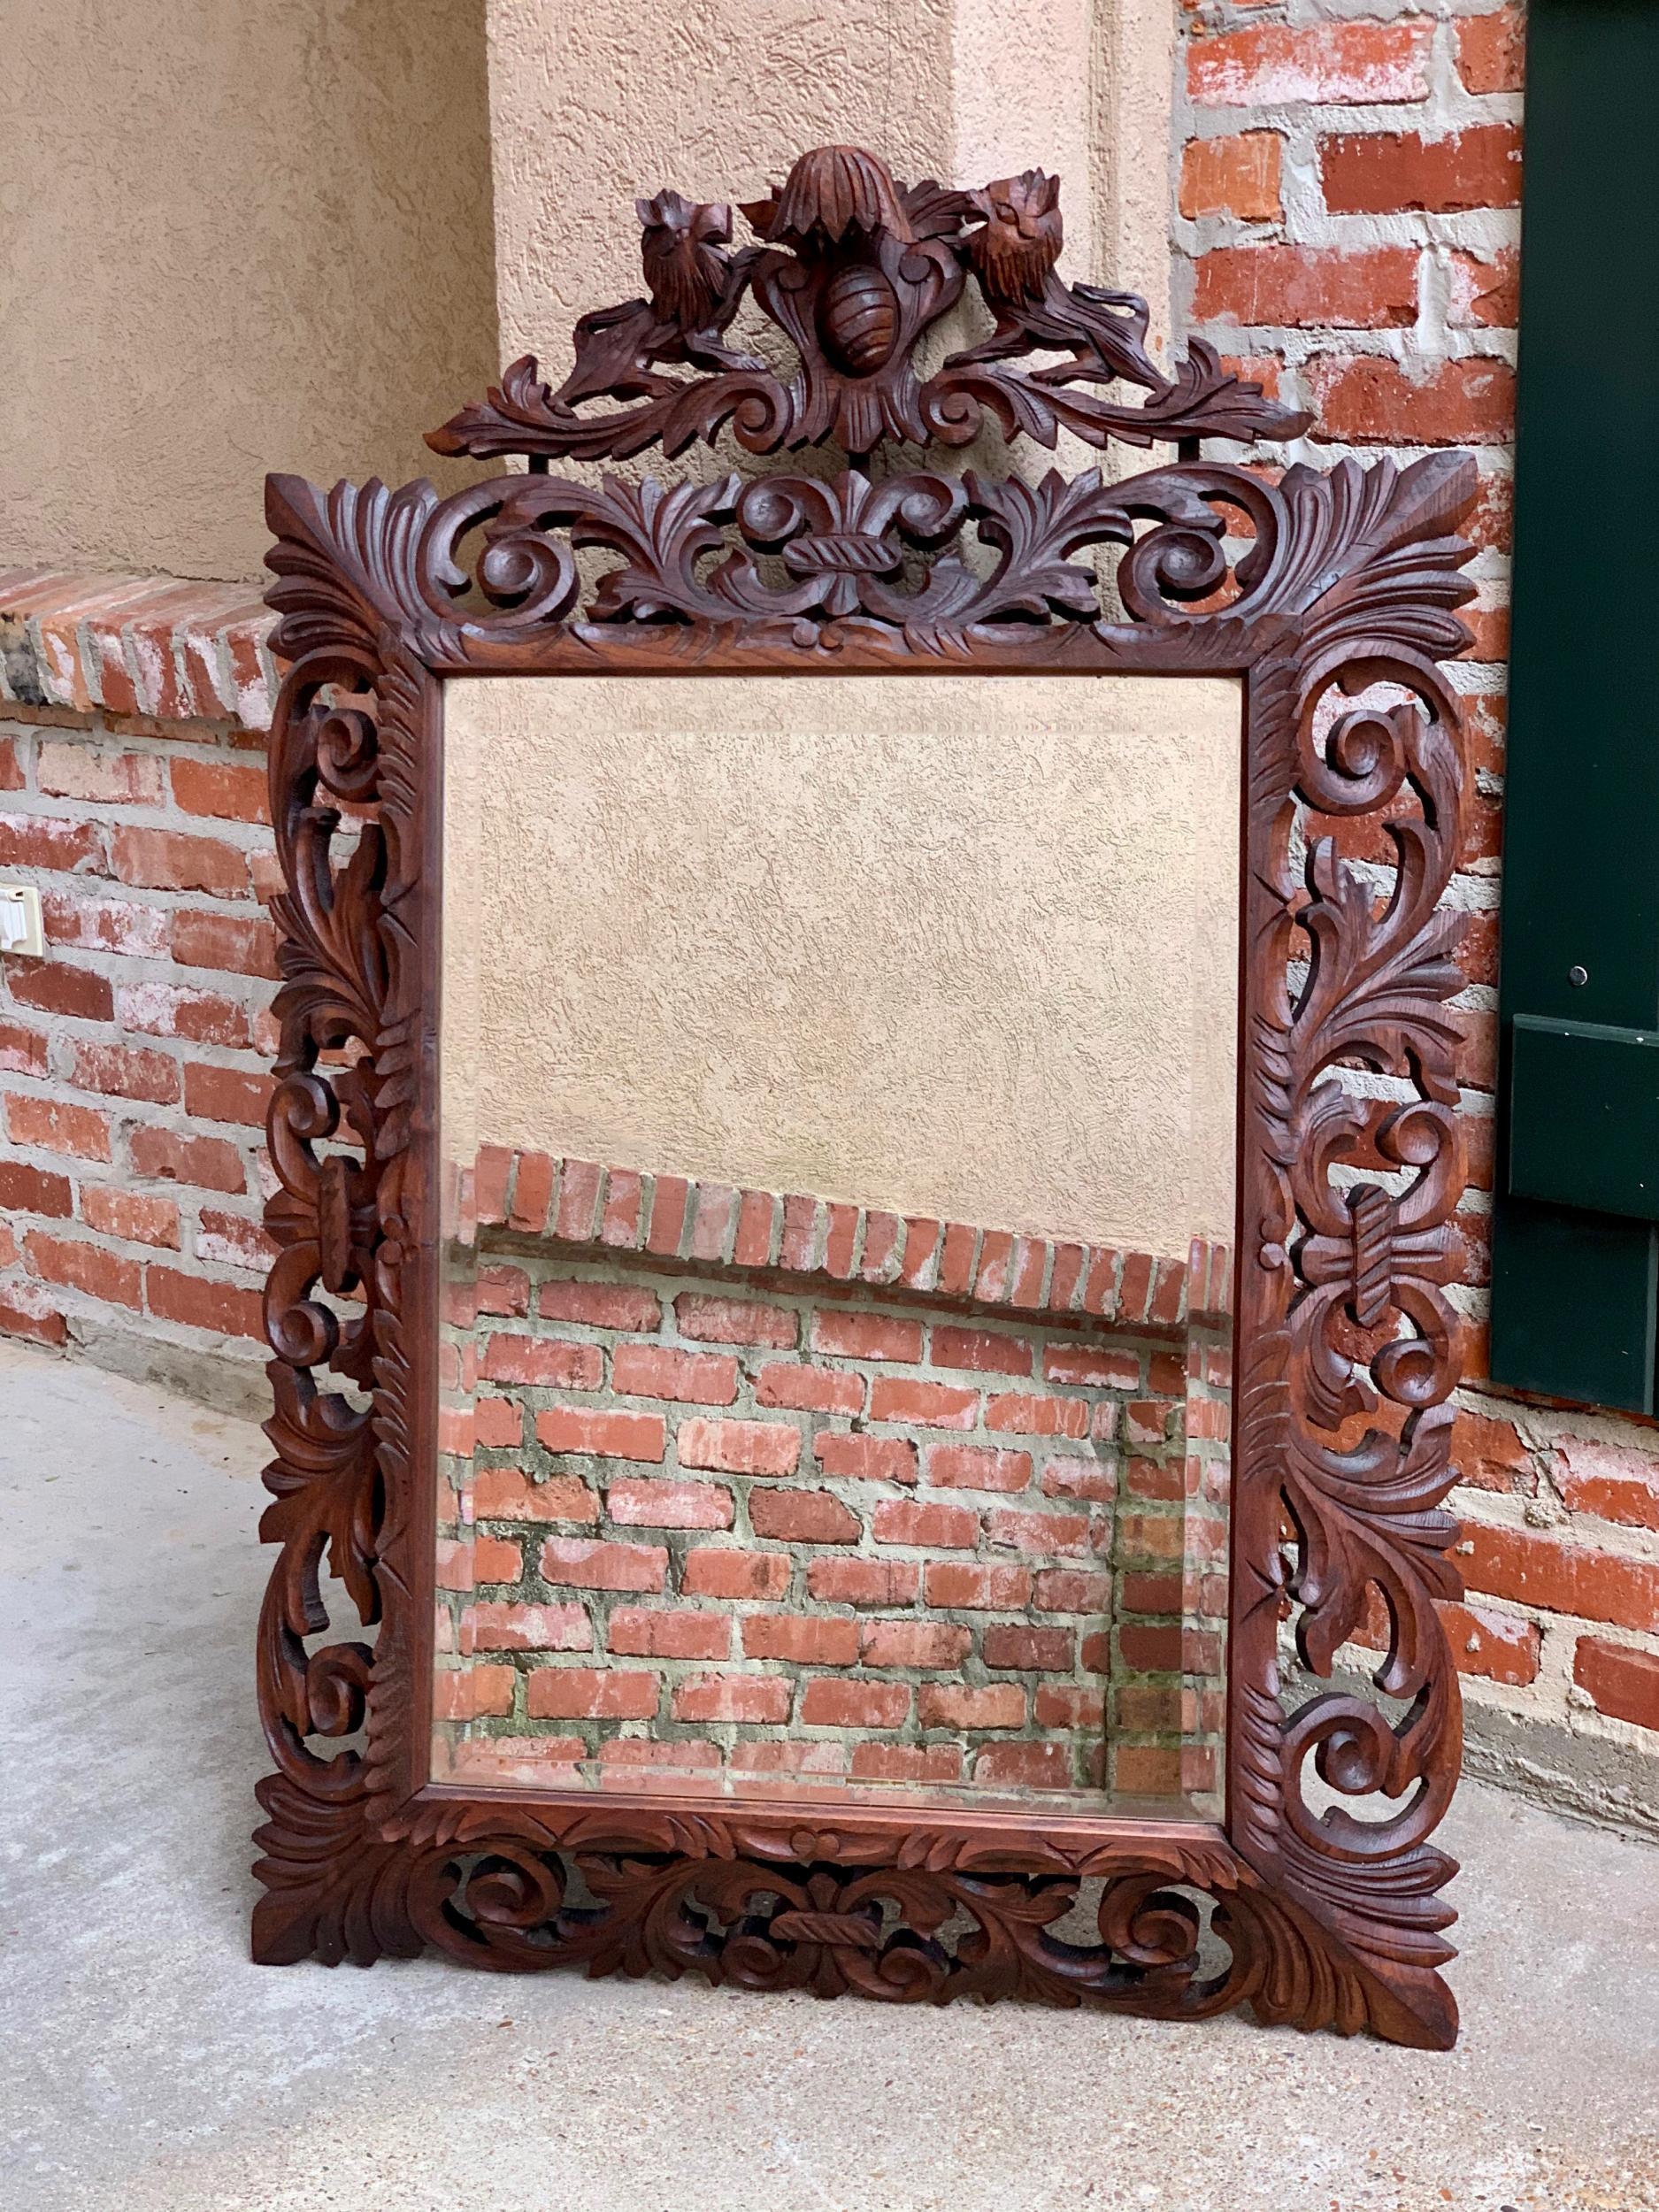 Antique French carved oak frame beveled mirror wall pier mantel renaissance style.

~Direct from France~
~Large and lovely antique carved French wall or mantel mirror~
~Wide frame, open carved on all sides, classic style that blends with any